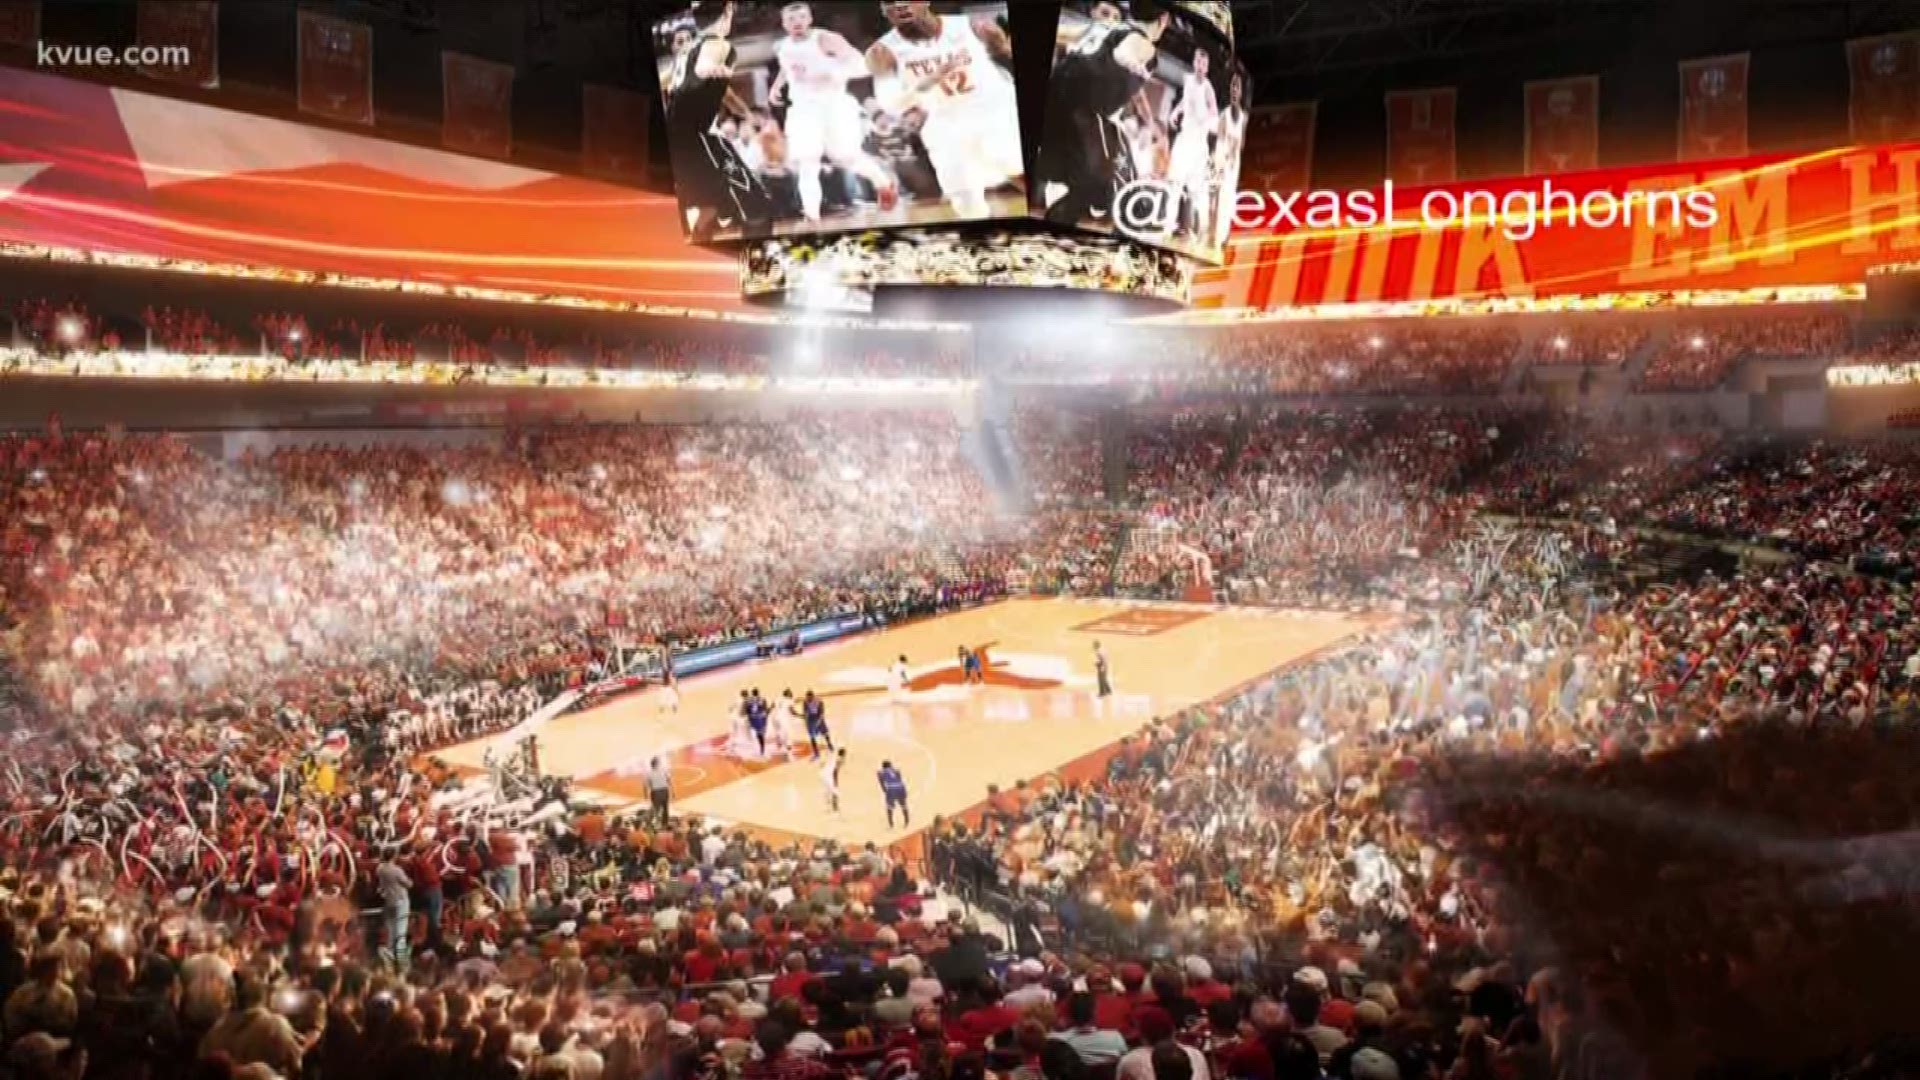 The UT System Board of Regents voted on Thursday for the next step forward in building an events arena to replace the Frank C. Erwin Special Events Center. The new arena will host both men and women's basketball games, graduations, concerts and other even